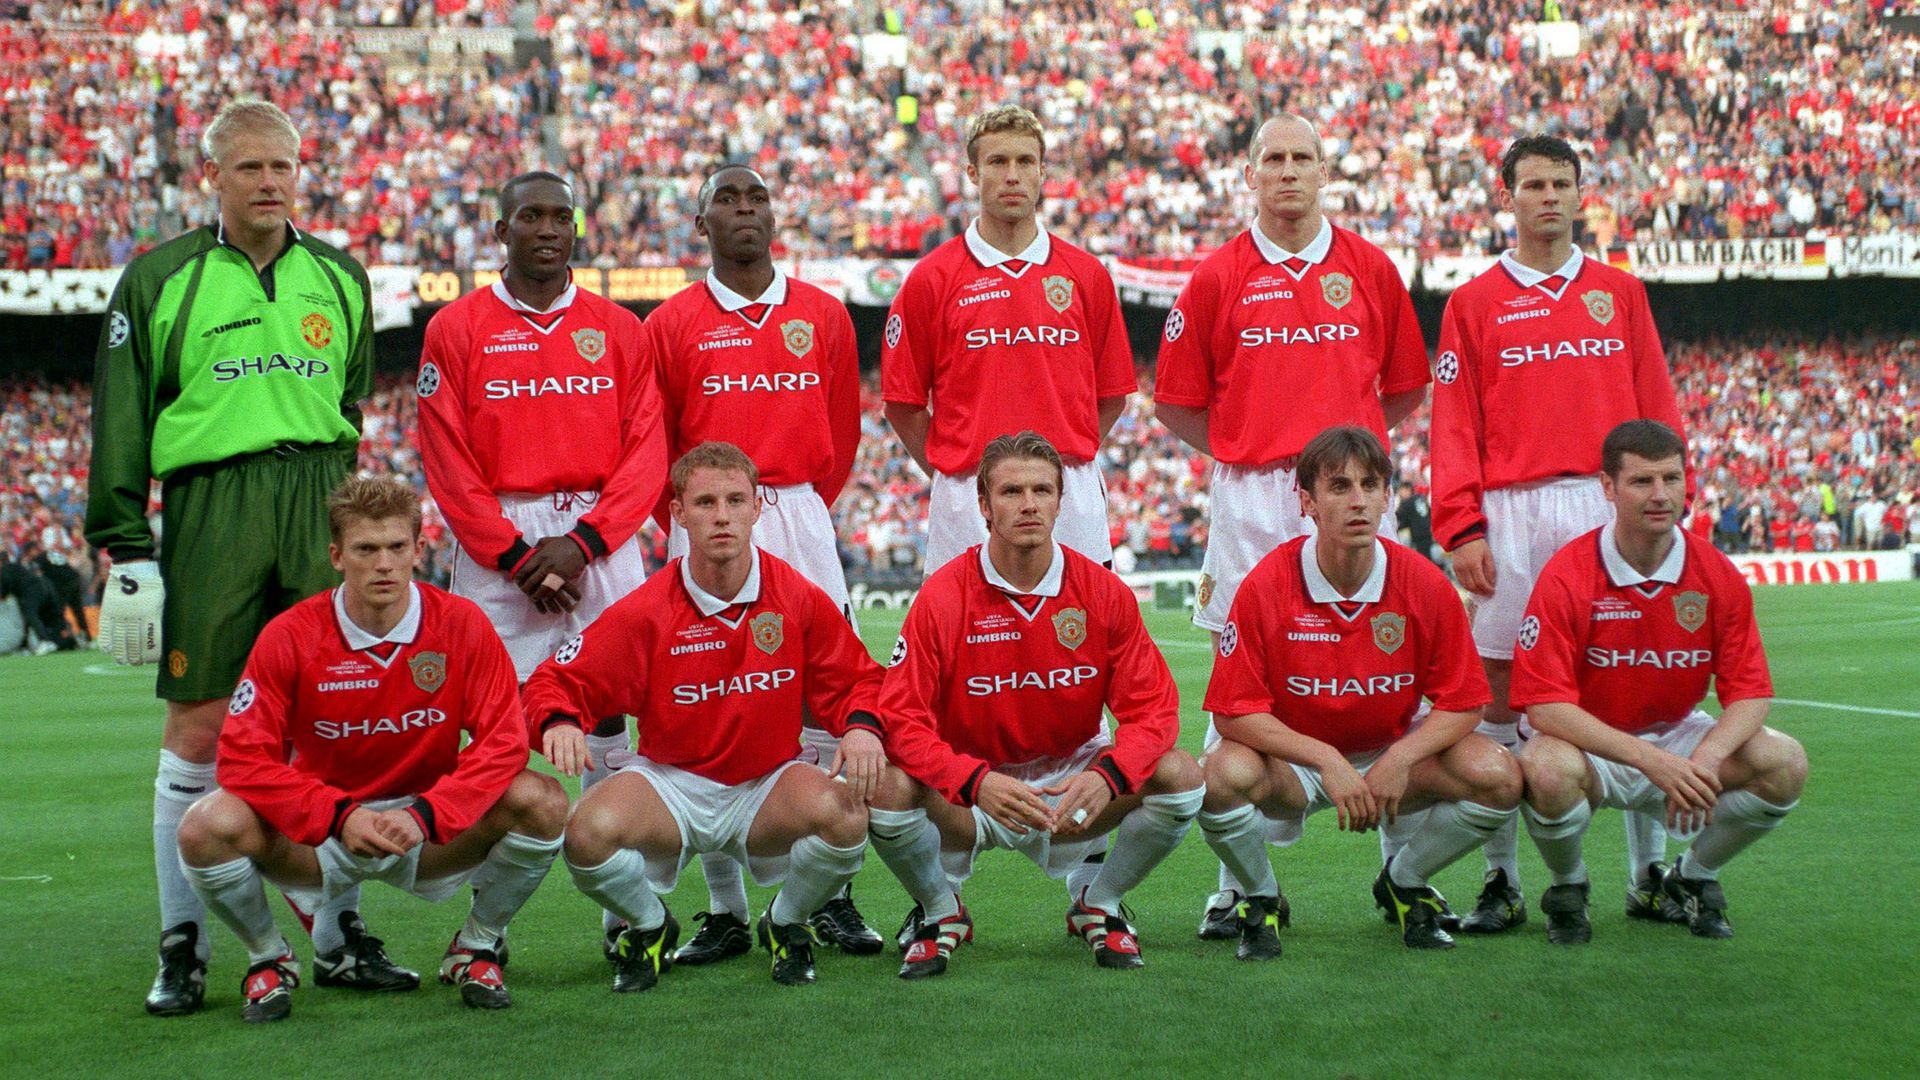 Man Utd and Bayern Munich squads confirmed for Treble Reunion match